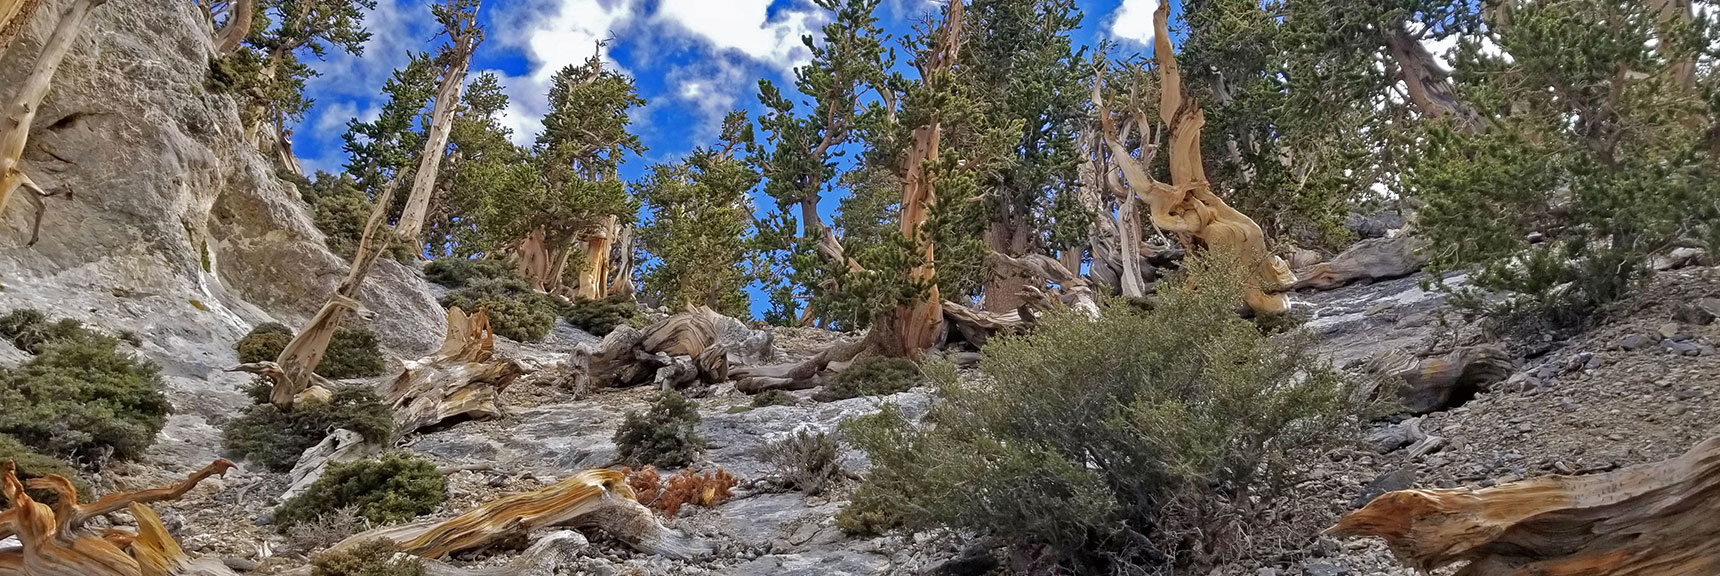 Weaving Through Majestic Pines, Along the Western Summit Cliff-line | The Sisters South | Lee Canyon | Mt Charleston Wilderness | Spring Mountains, Nevada